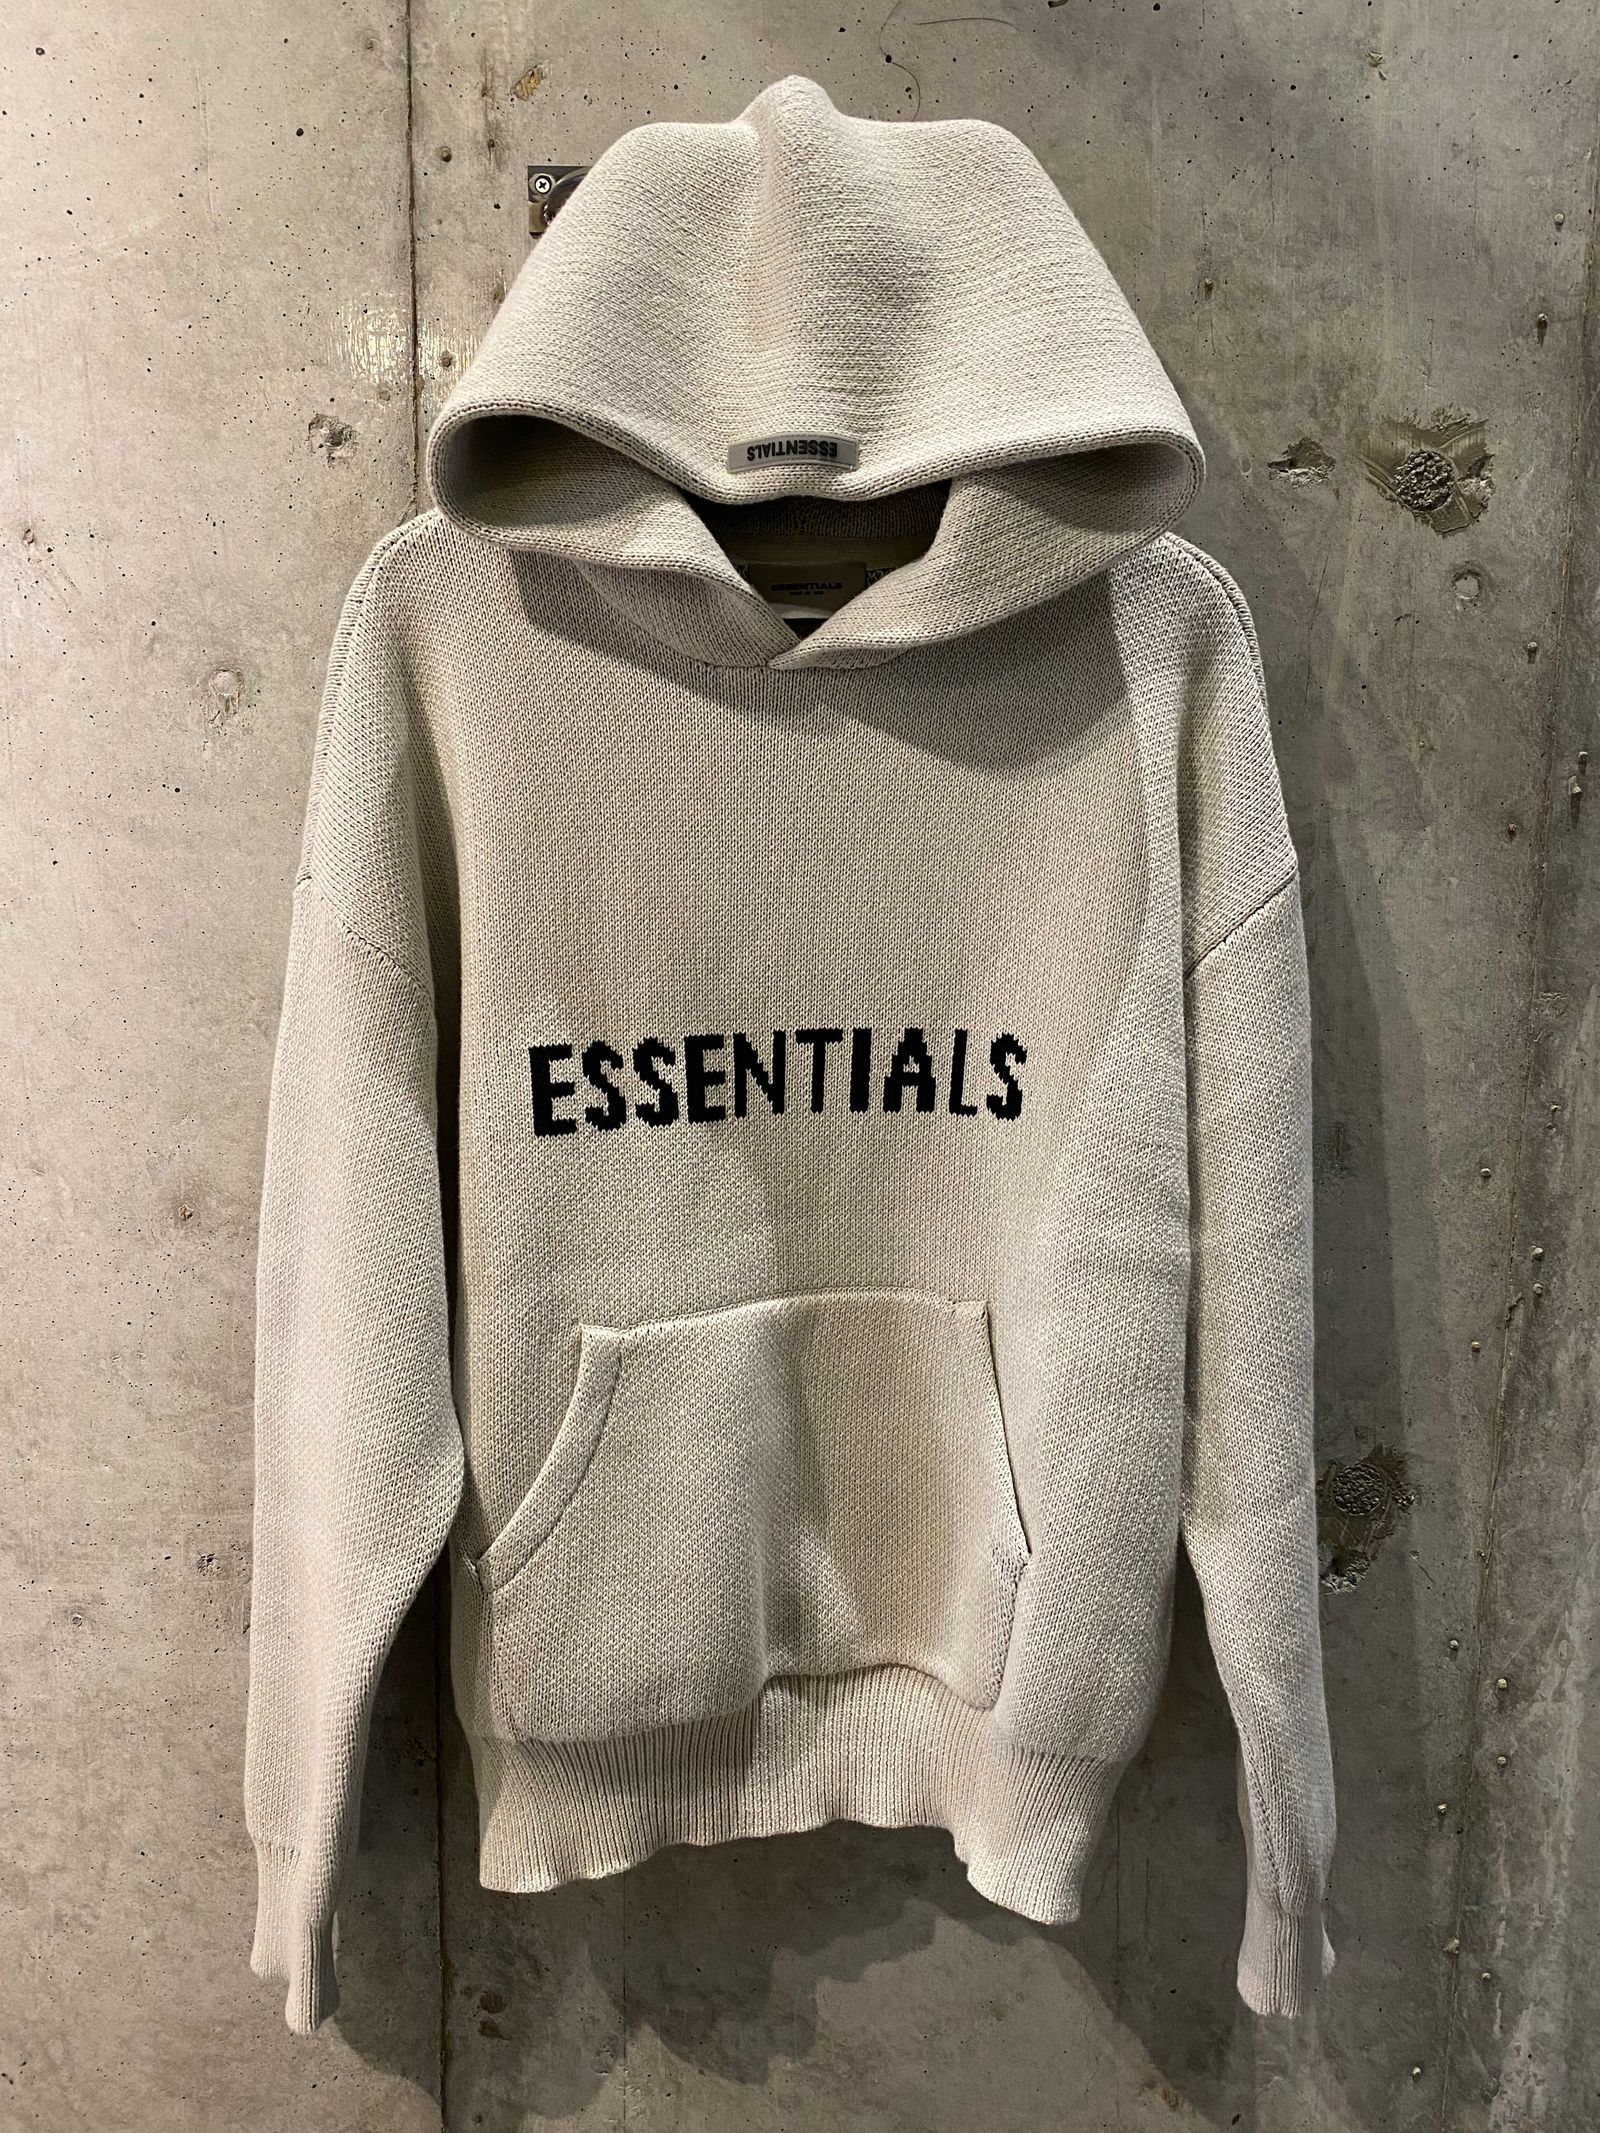 FOG ESSENTIALS KNIT HOODIE/oatmeal | R and another stories